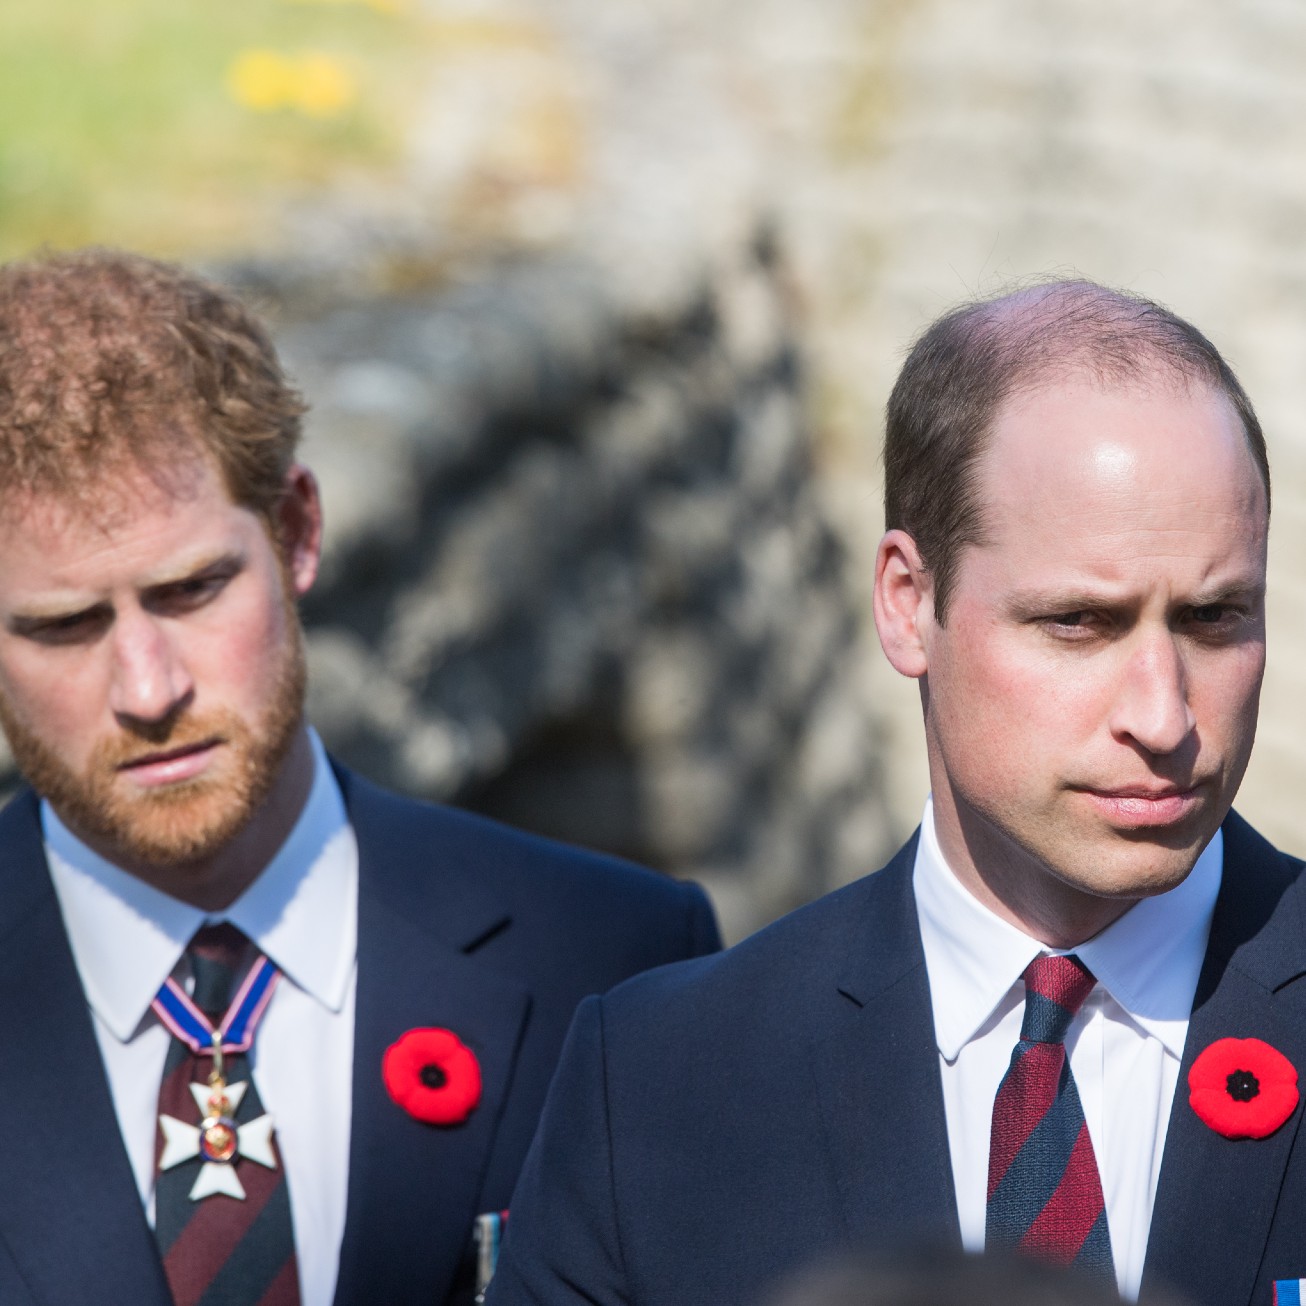  Prince Harry's relationship with Prince William 